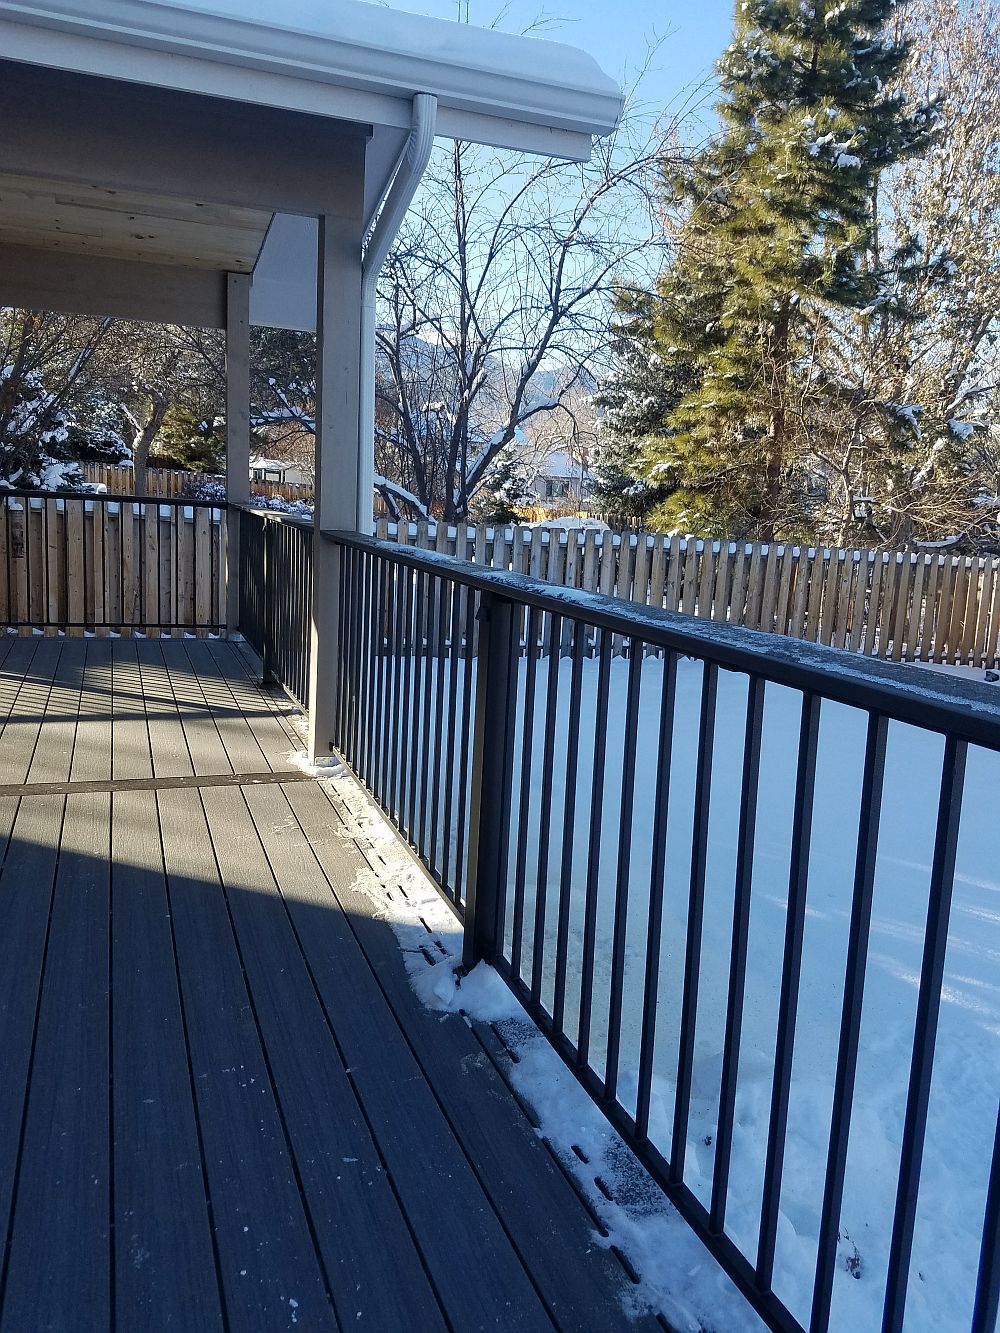 Fortress Fe26 metal panel deck railing with 3x3 posts and round metal balusters